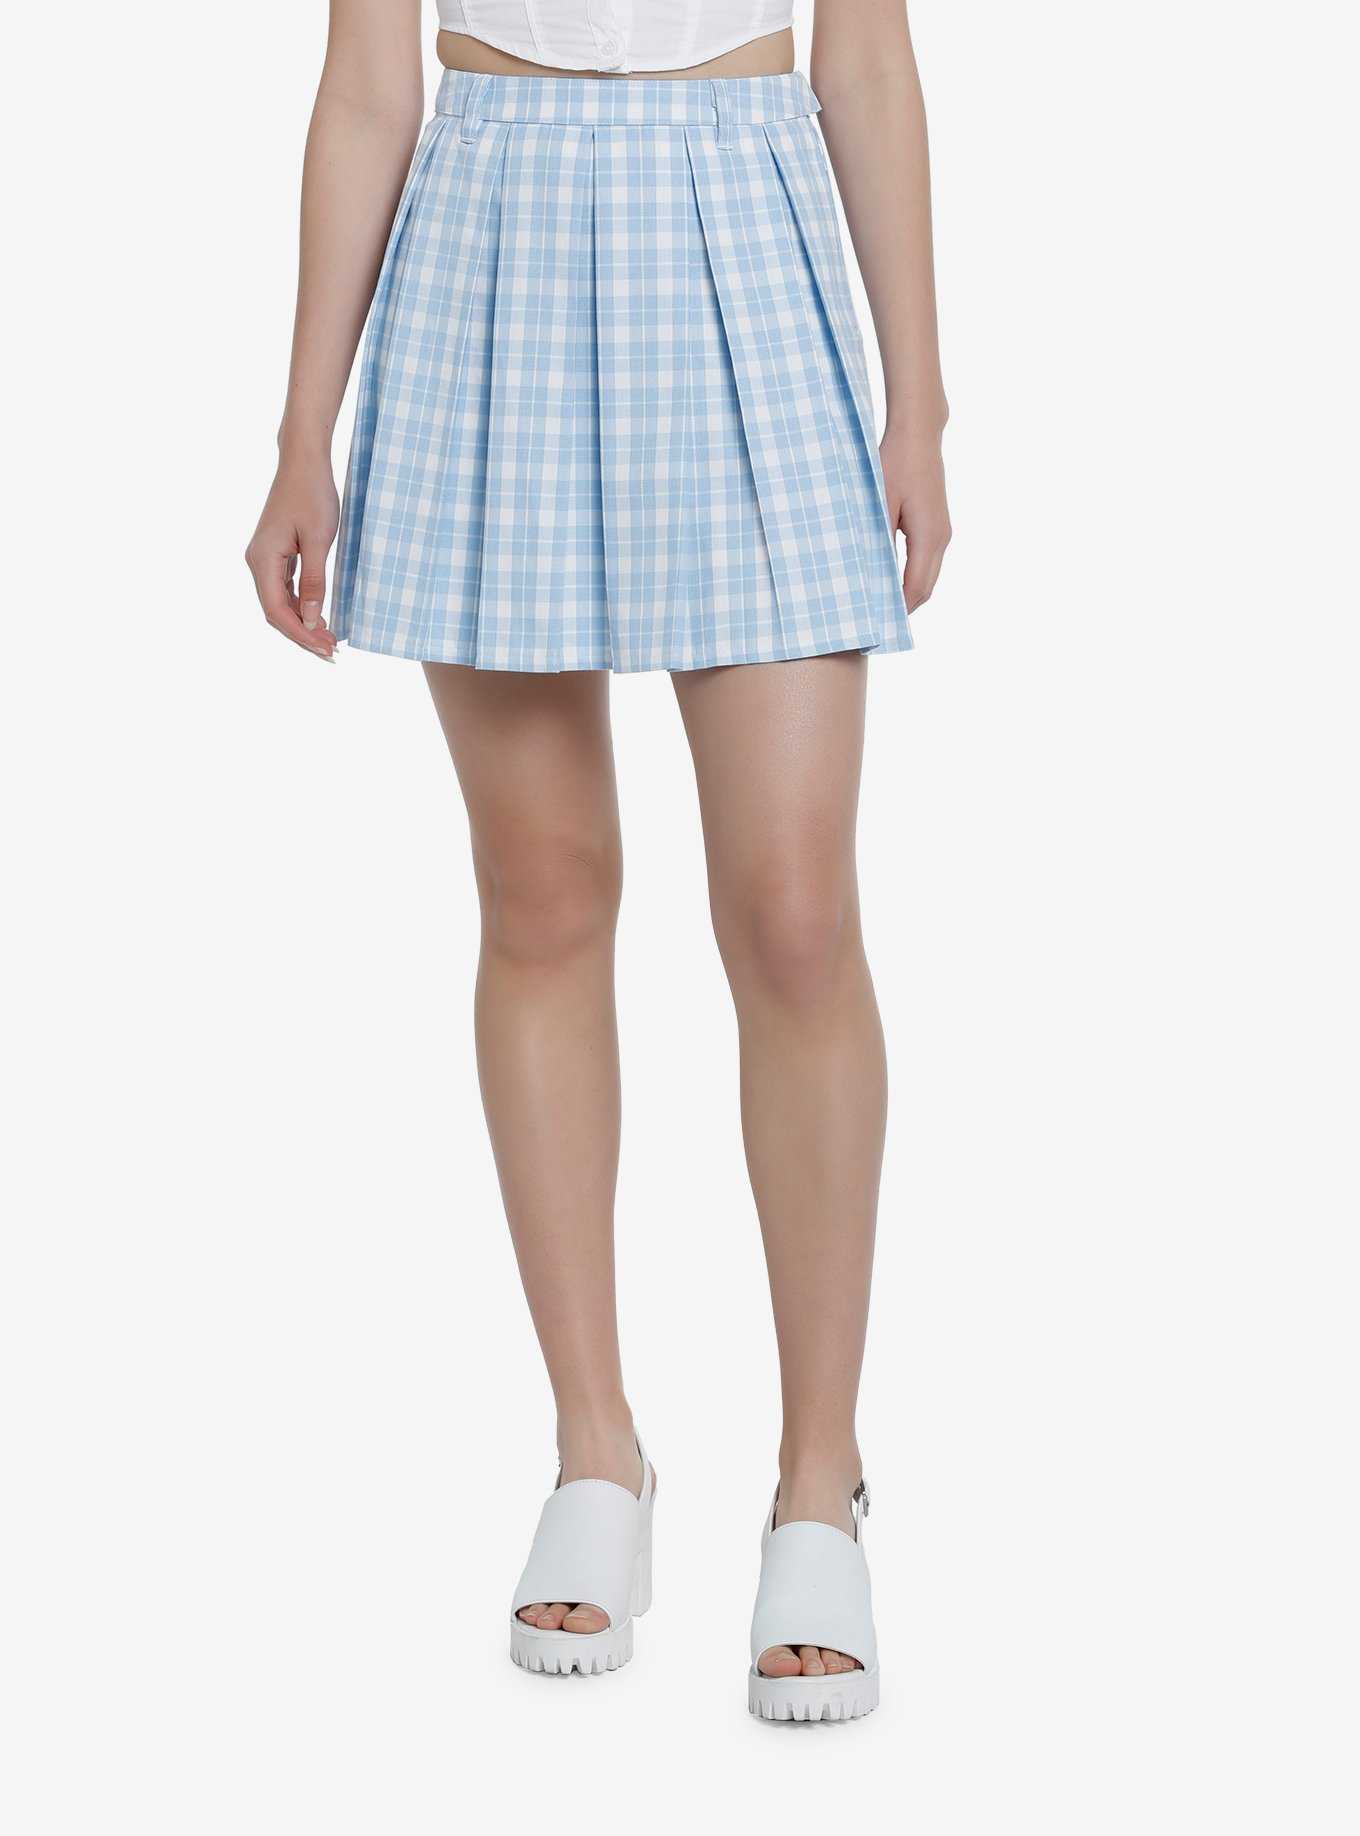 Sweet Society Baby Blue Plaid Pleated Skirt, , hi-res